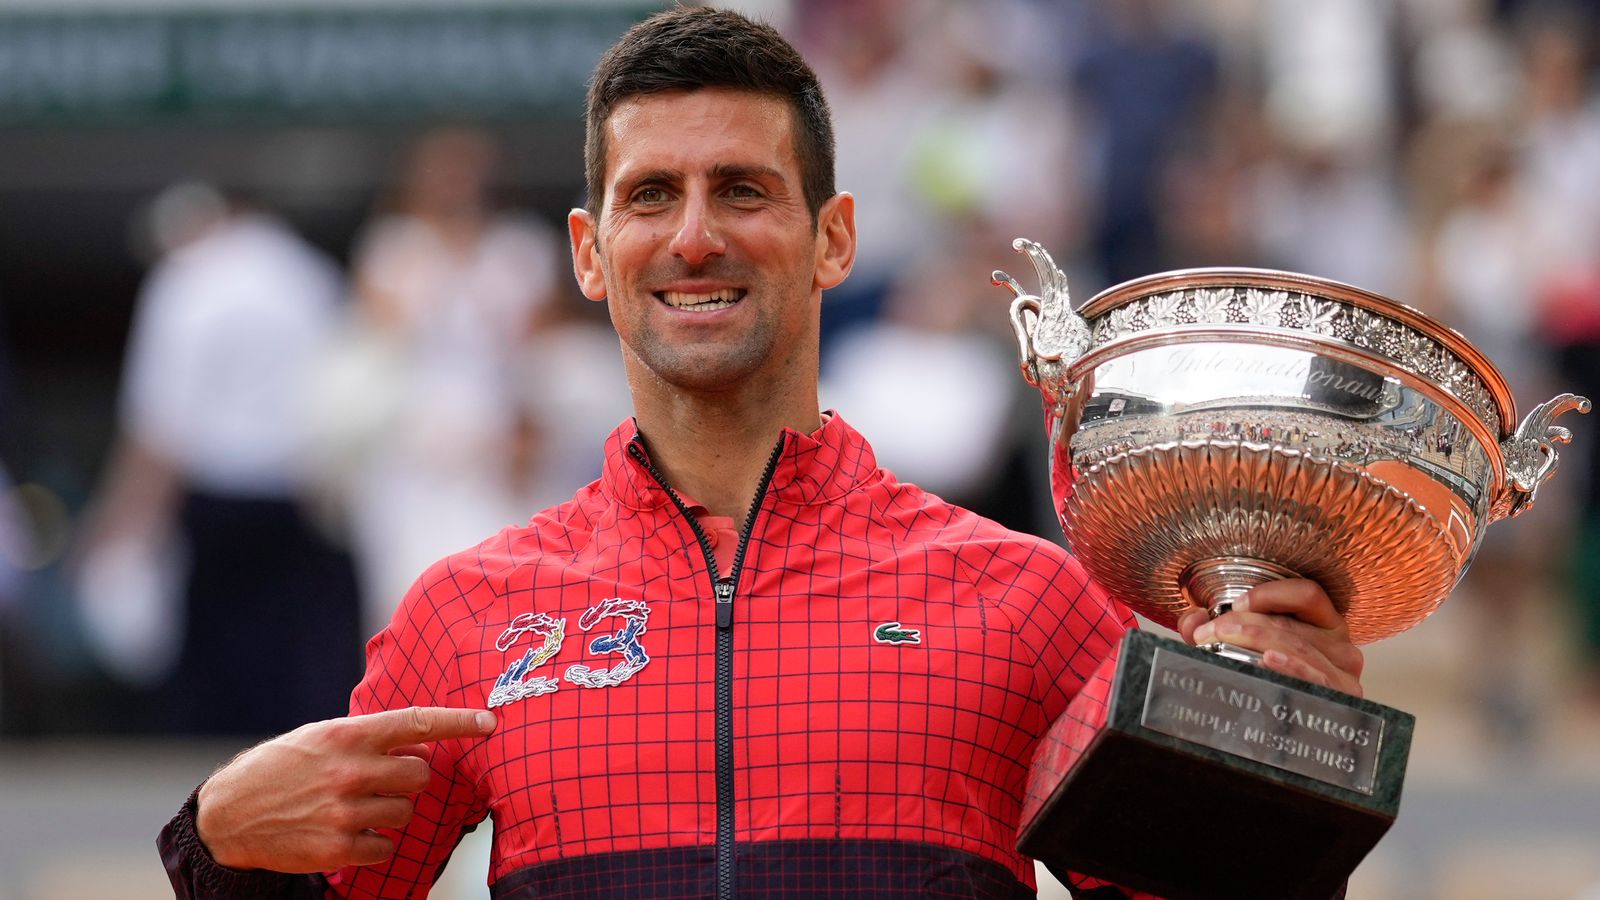 Novak Djokovic: French Open winner says he's staying out the GOAT debate as he sets sights on Wimbledon